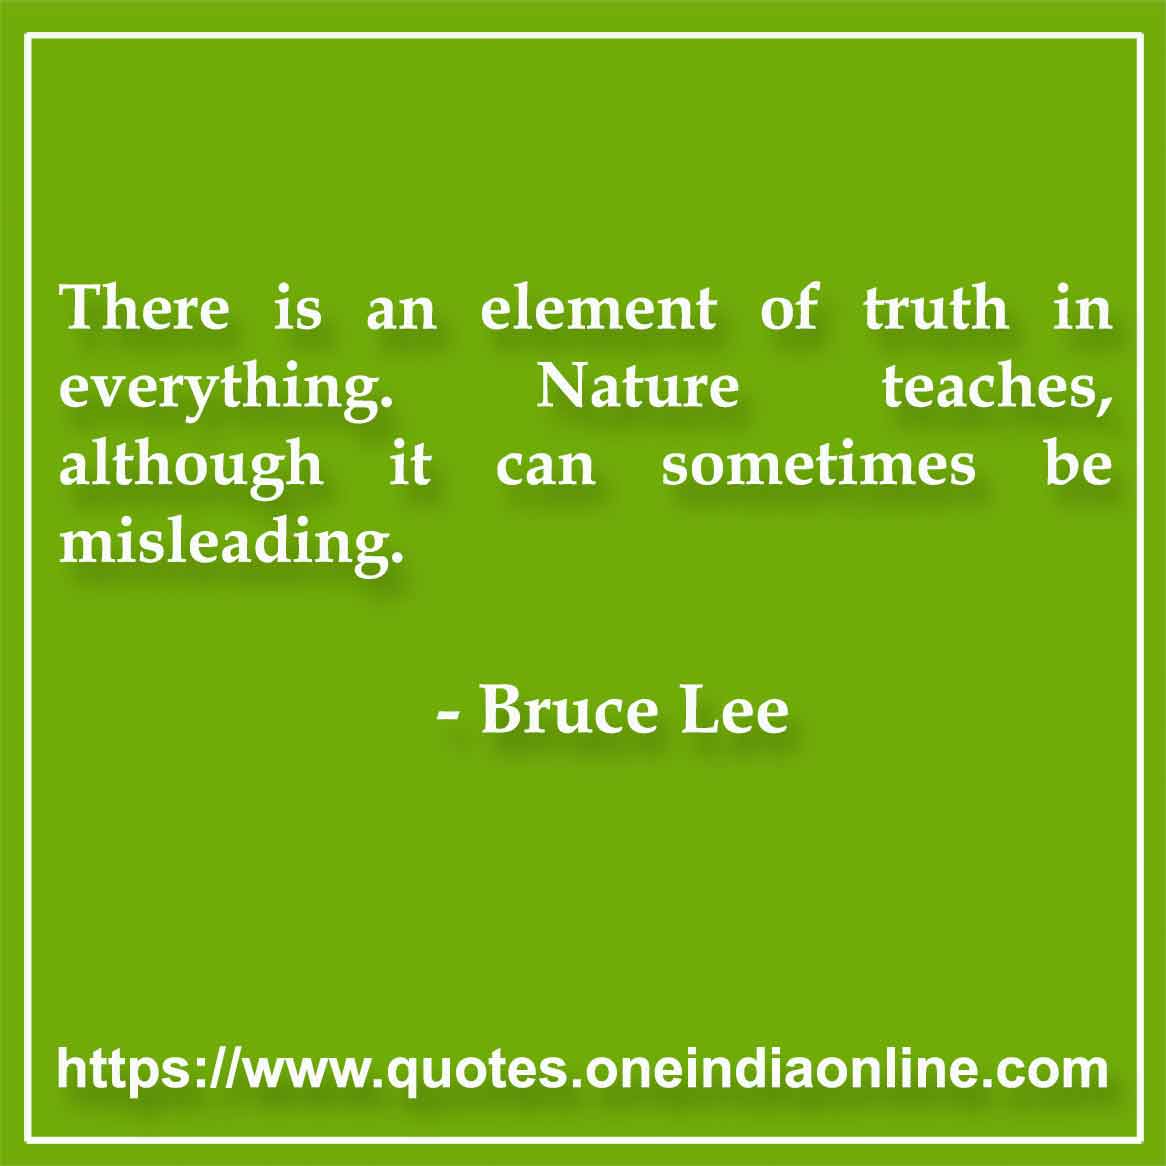 There is an element of truth in everything. Nature teaches, although it can sometimes be misleading.

-  by Bruce Lee